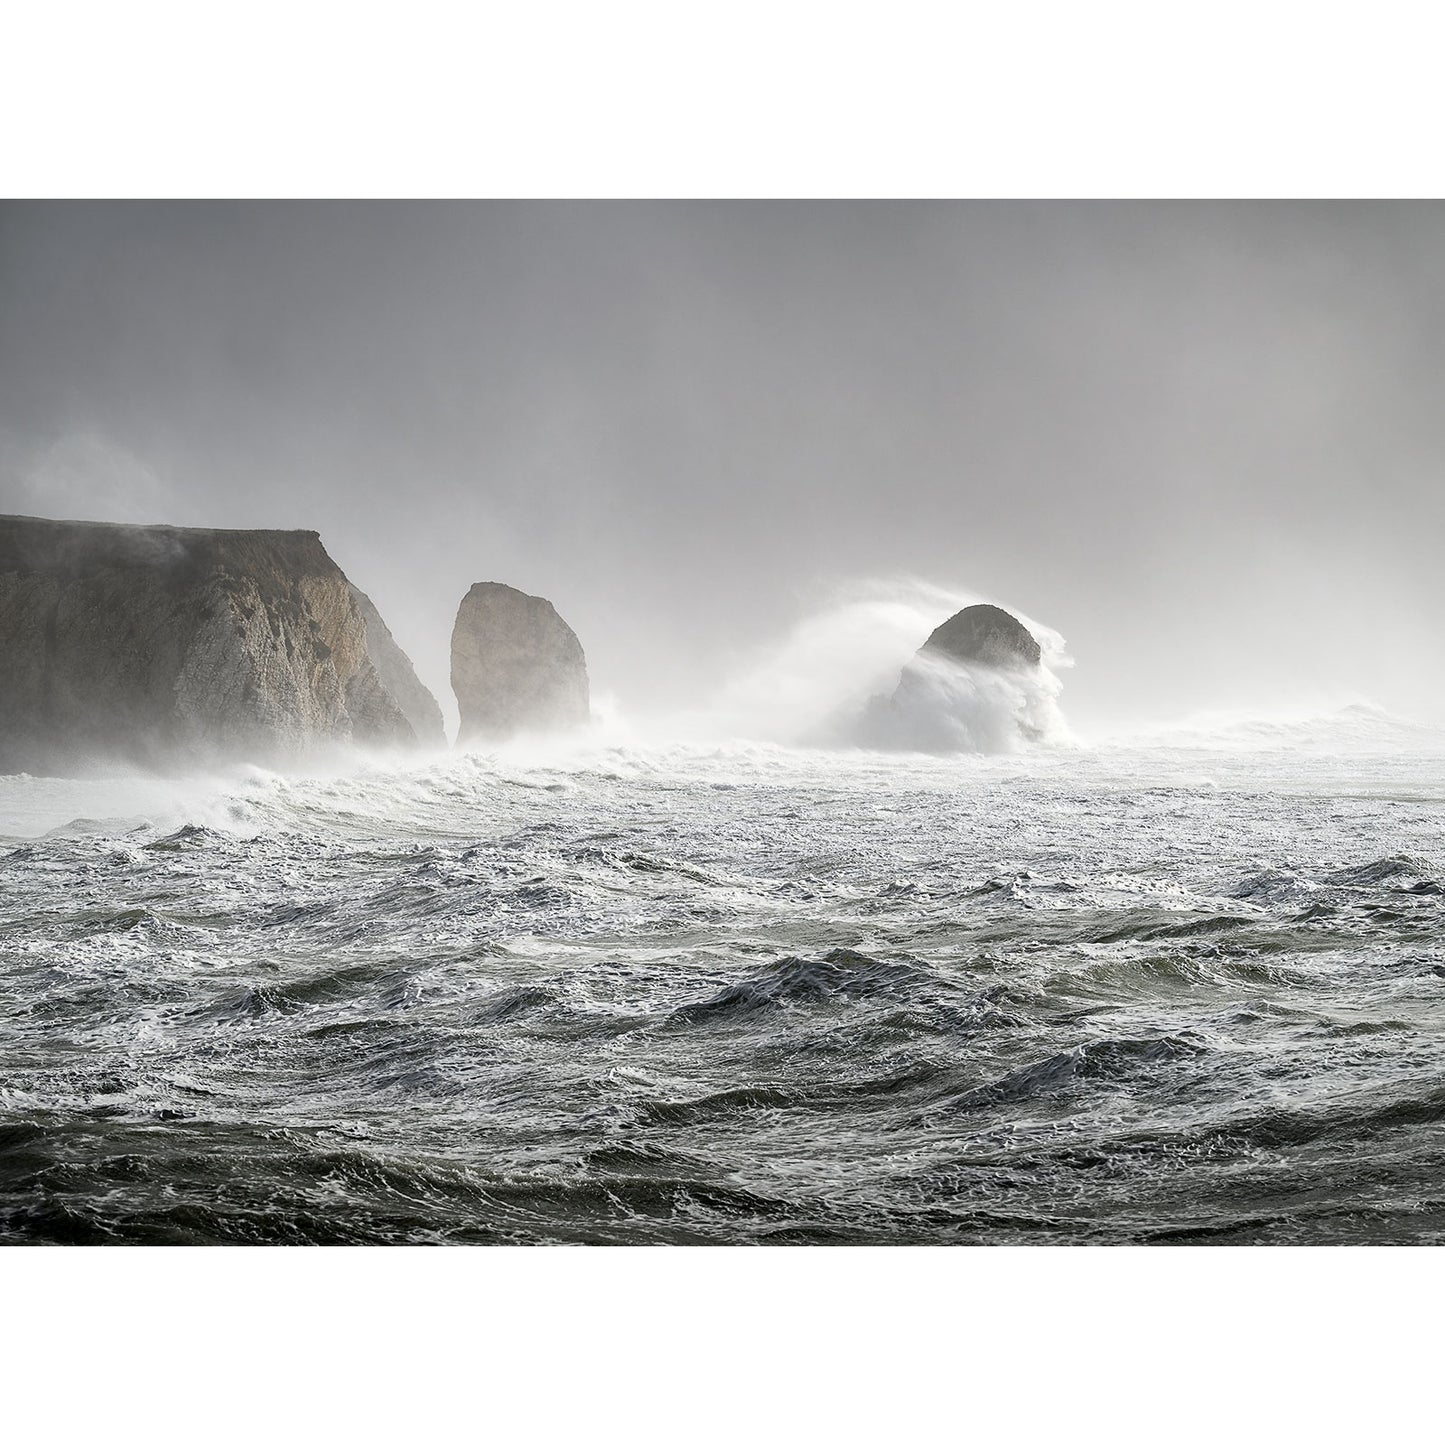 Storm Eunice with large waves breaking against cliffs under overcast skies, captured by Steve Gascoigne off the coast of Wight. - Available Light Photography